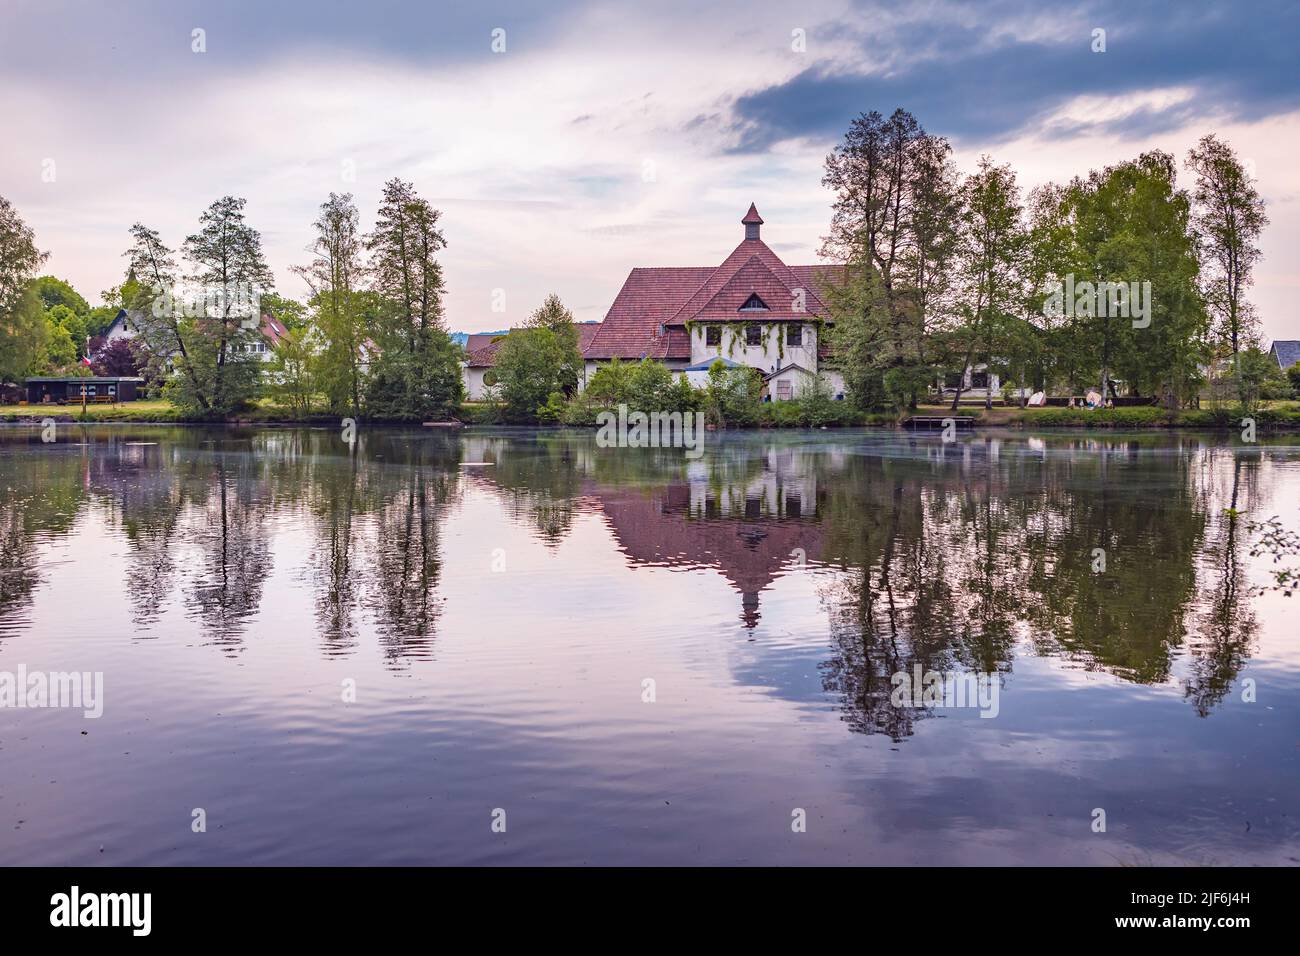 The Waldfriedensee lake of Neustadt bei Coburg town, Germany. Stock Photo